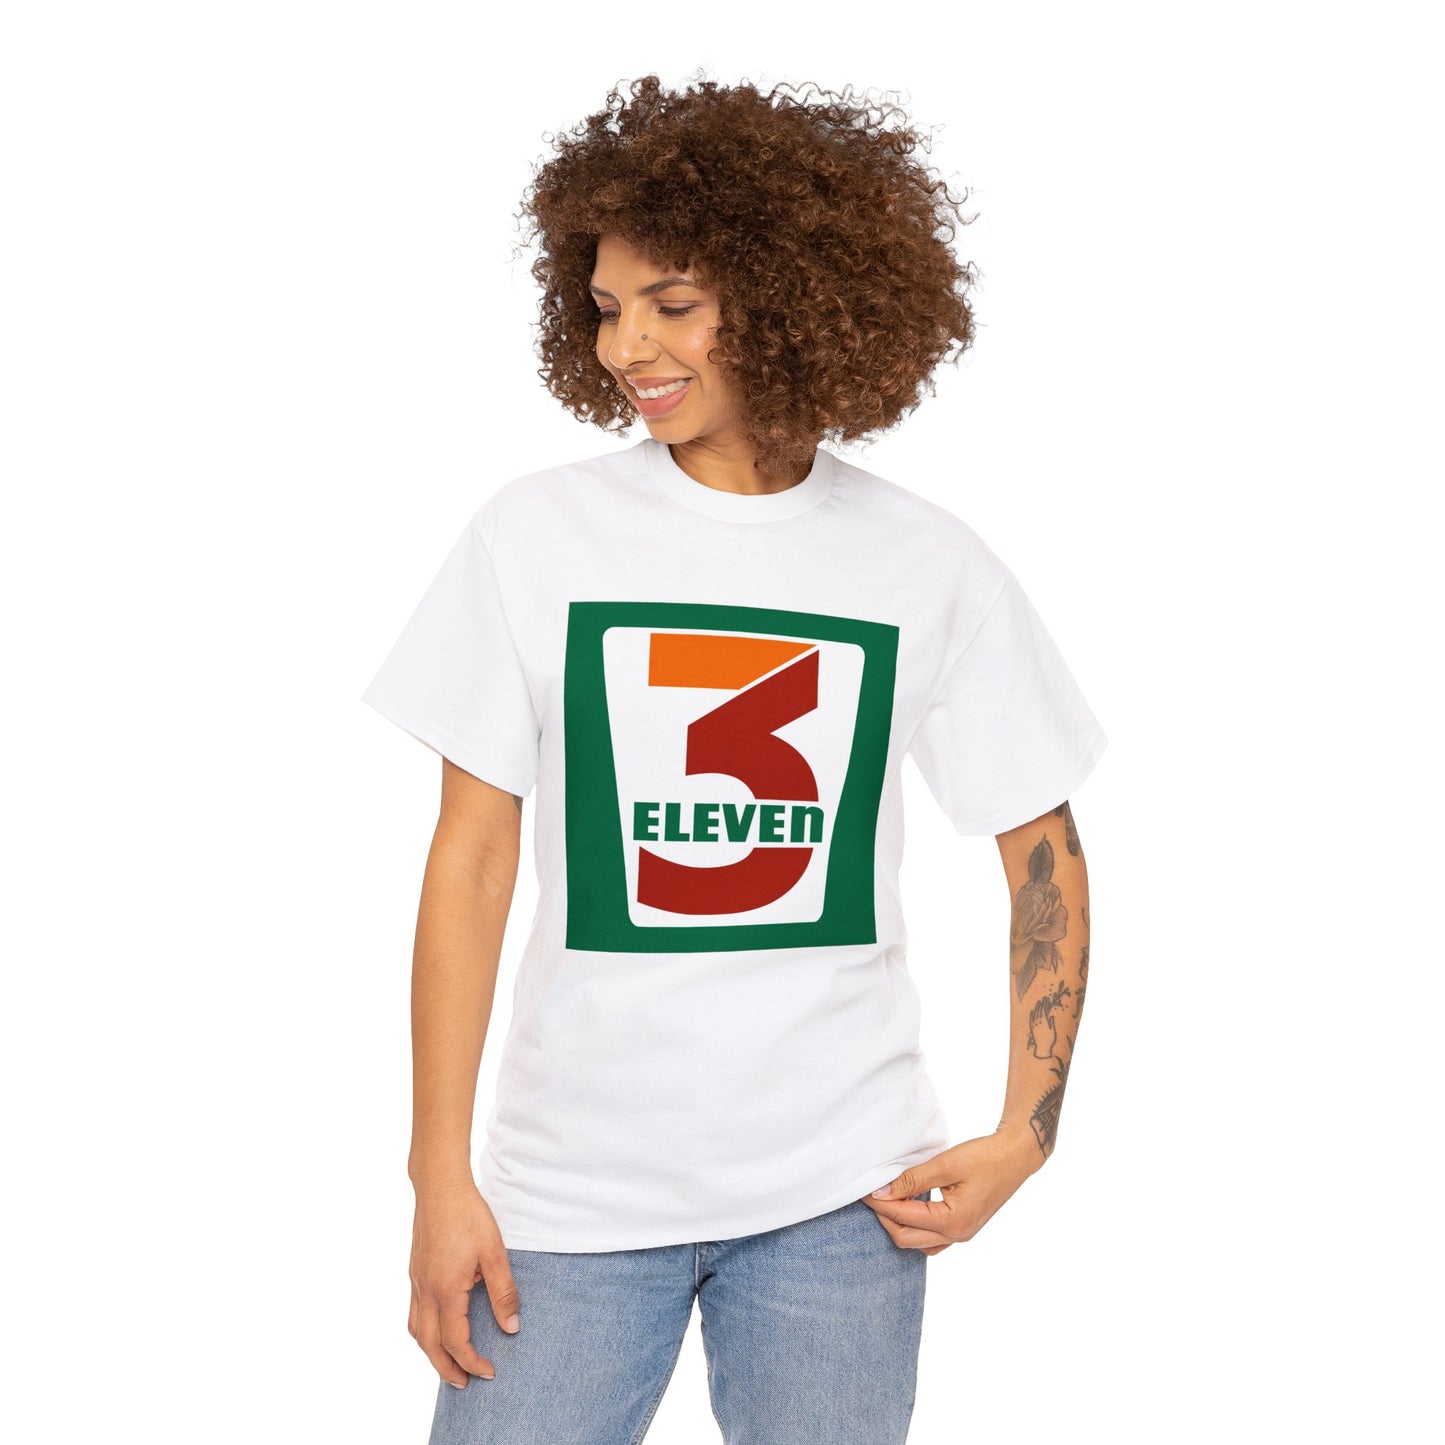 311 7 ELEVEN Rock Band Tour T-shirt for Sale